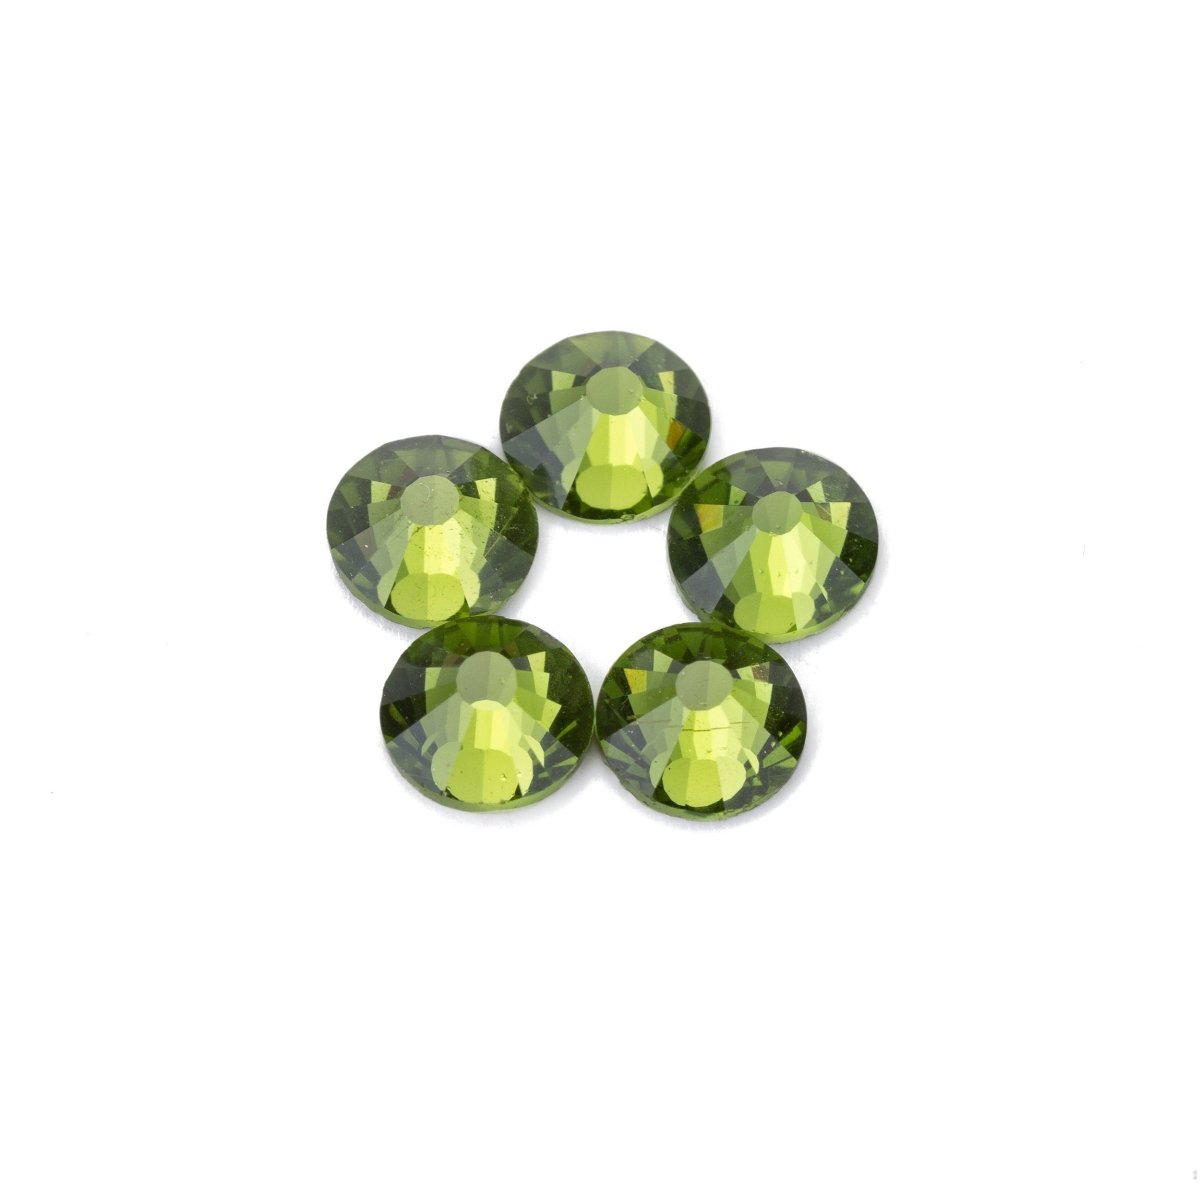 288 pcs High Quality Crystal Olive Green Crystal Olivine Rhinestones Loose Crystal flat back No Hot Fix glass beads Size ss 30 / ss 34, SS30-OLIVINE - DLUXCA